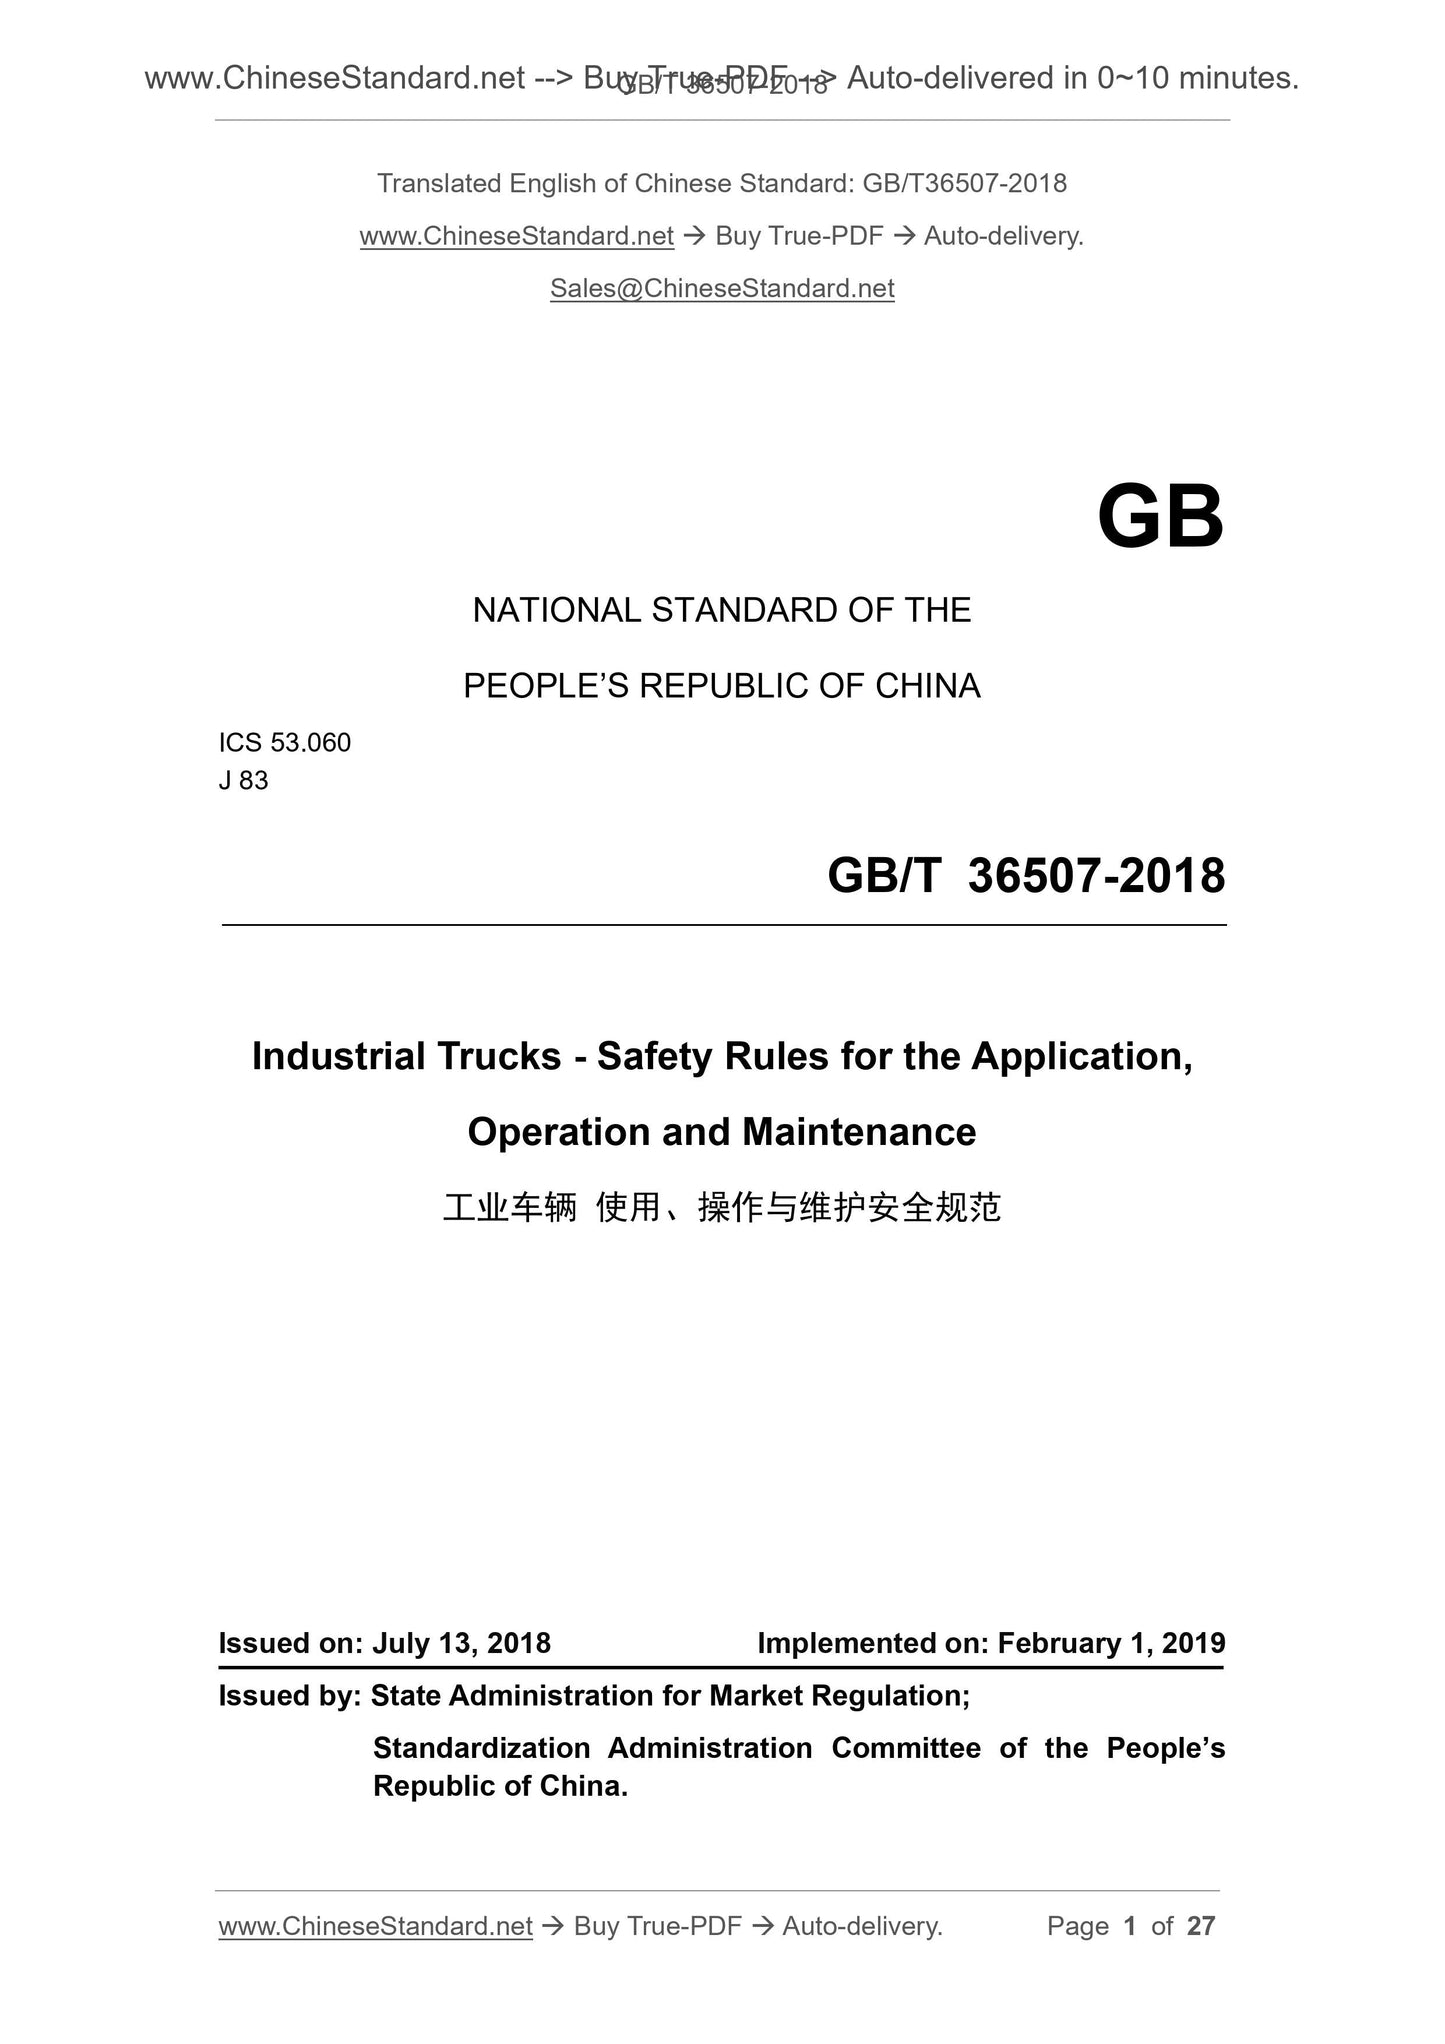 GB/T 36507-2018 Page 1